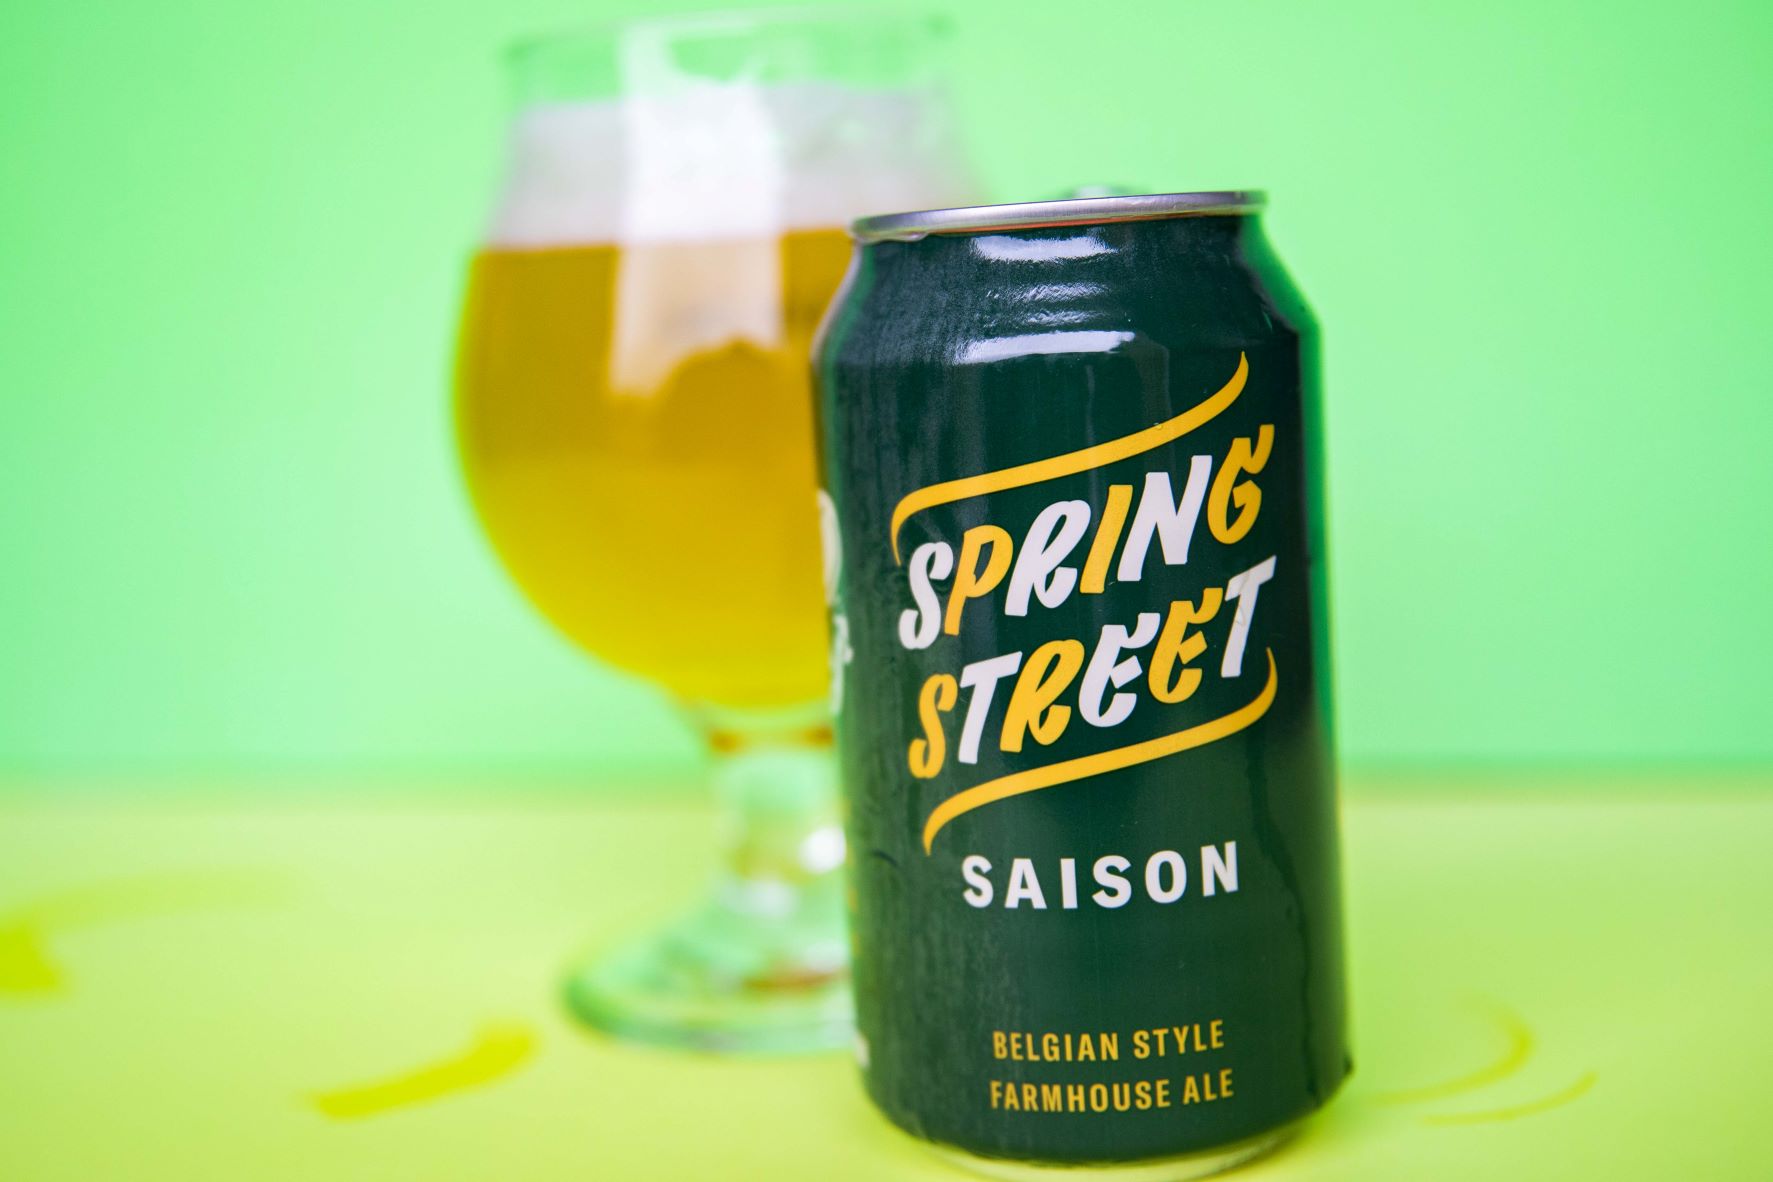 Spring Street Saison from Avondale Brewing Co.